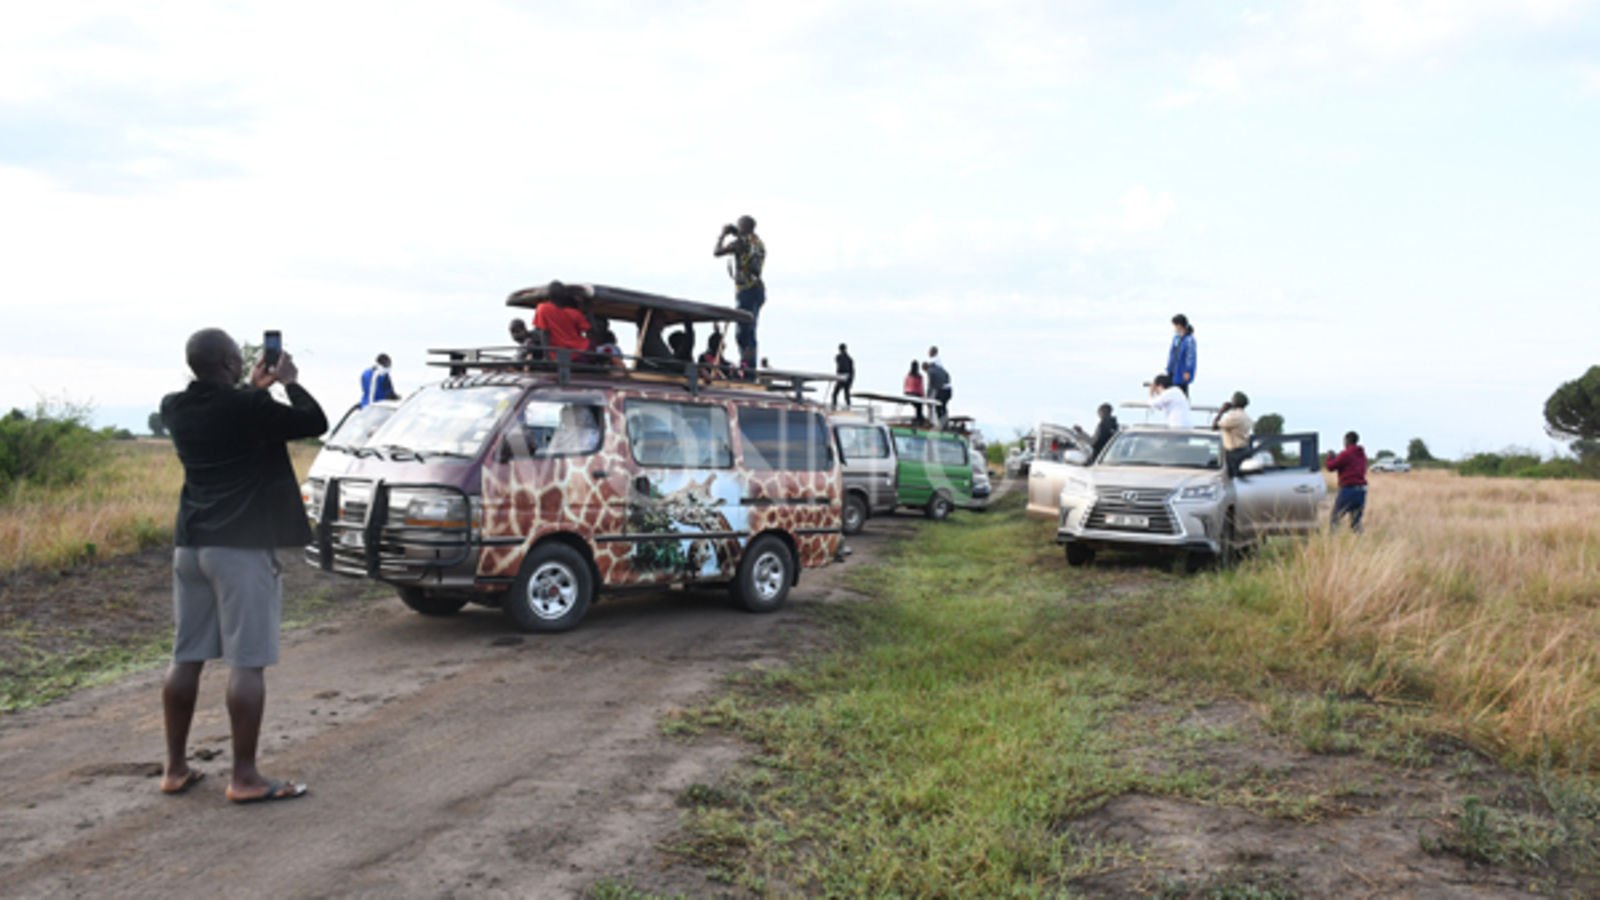 Destinations to Explore with a Rental Car in Uganda